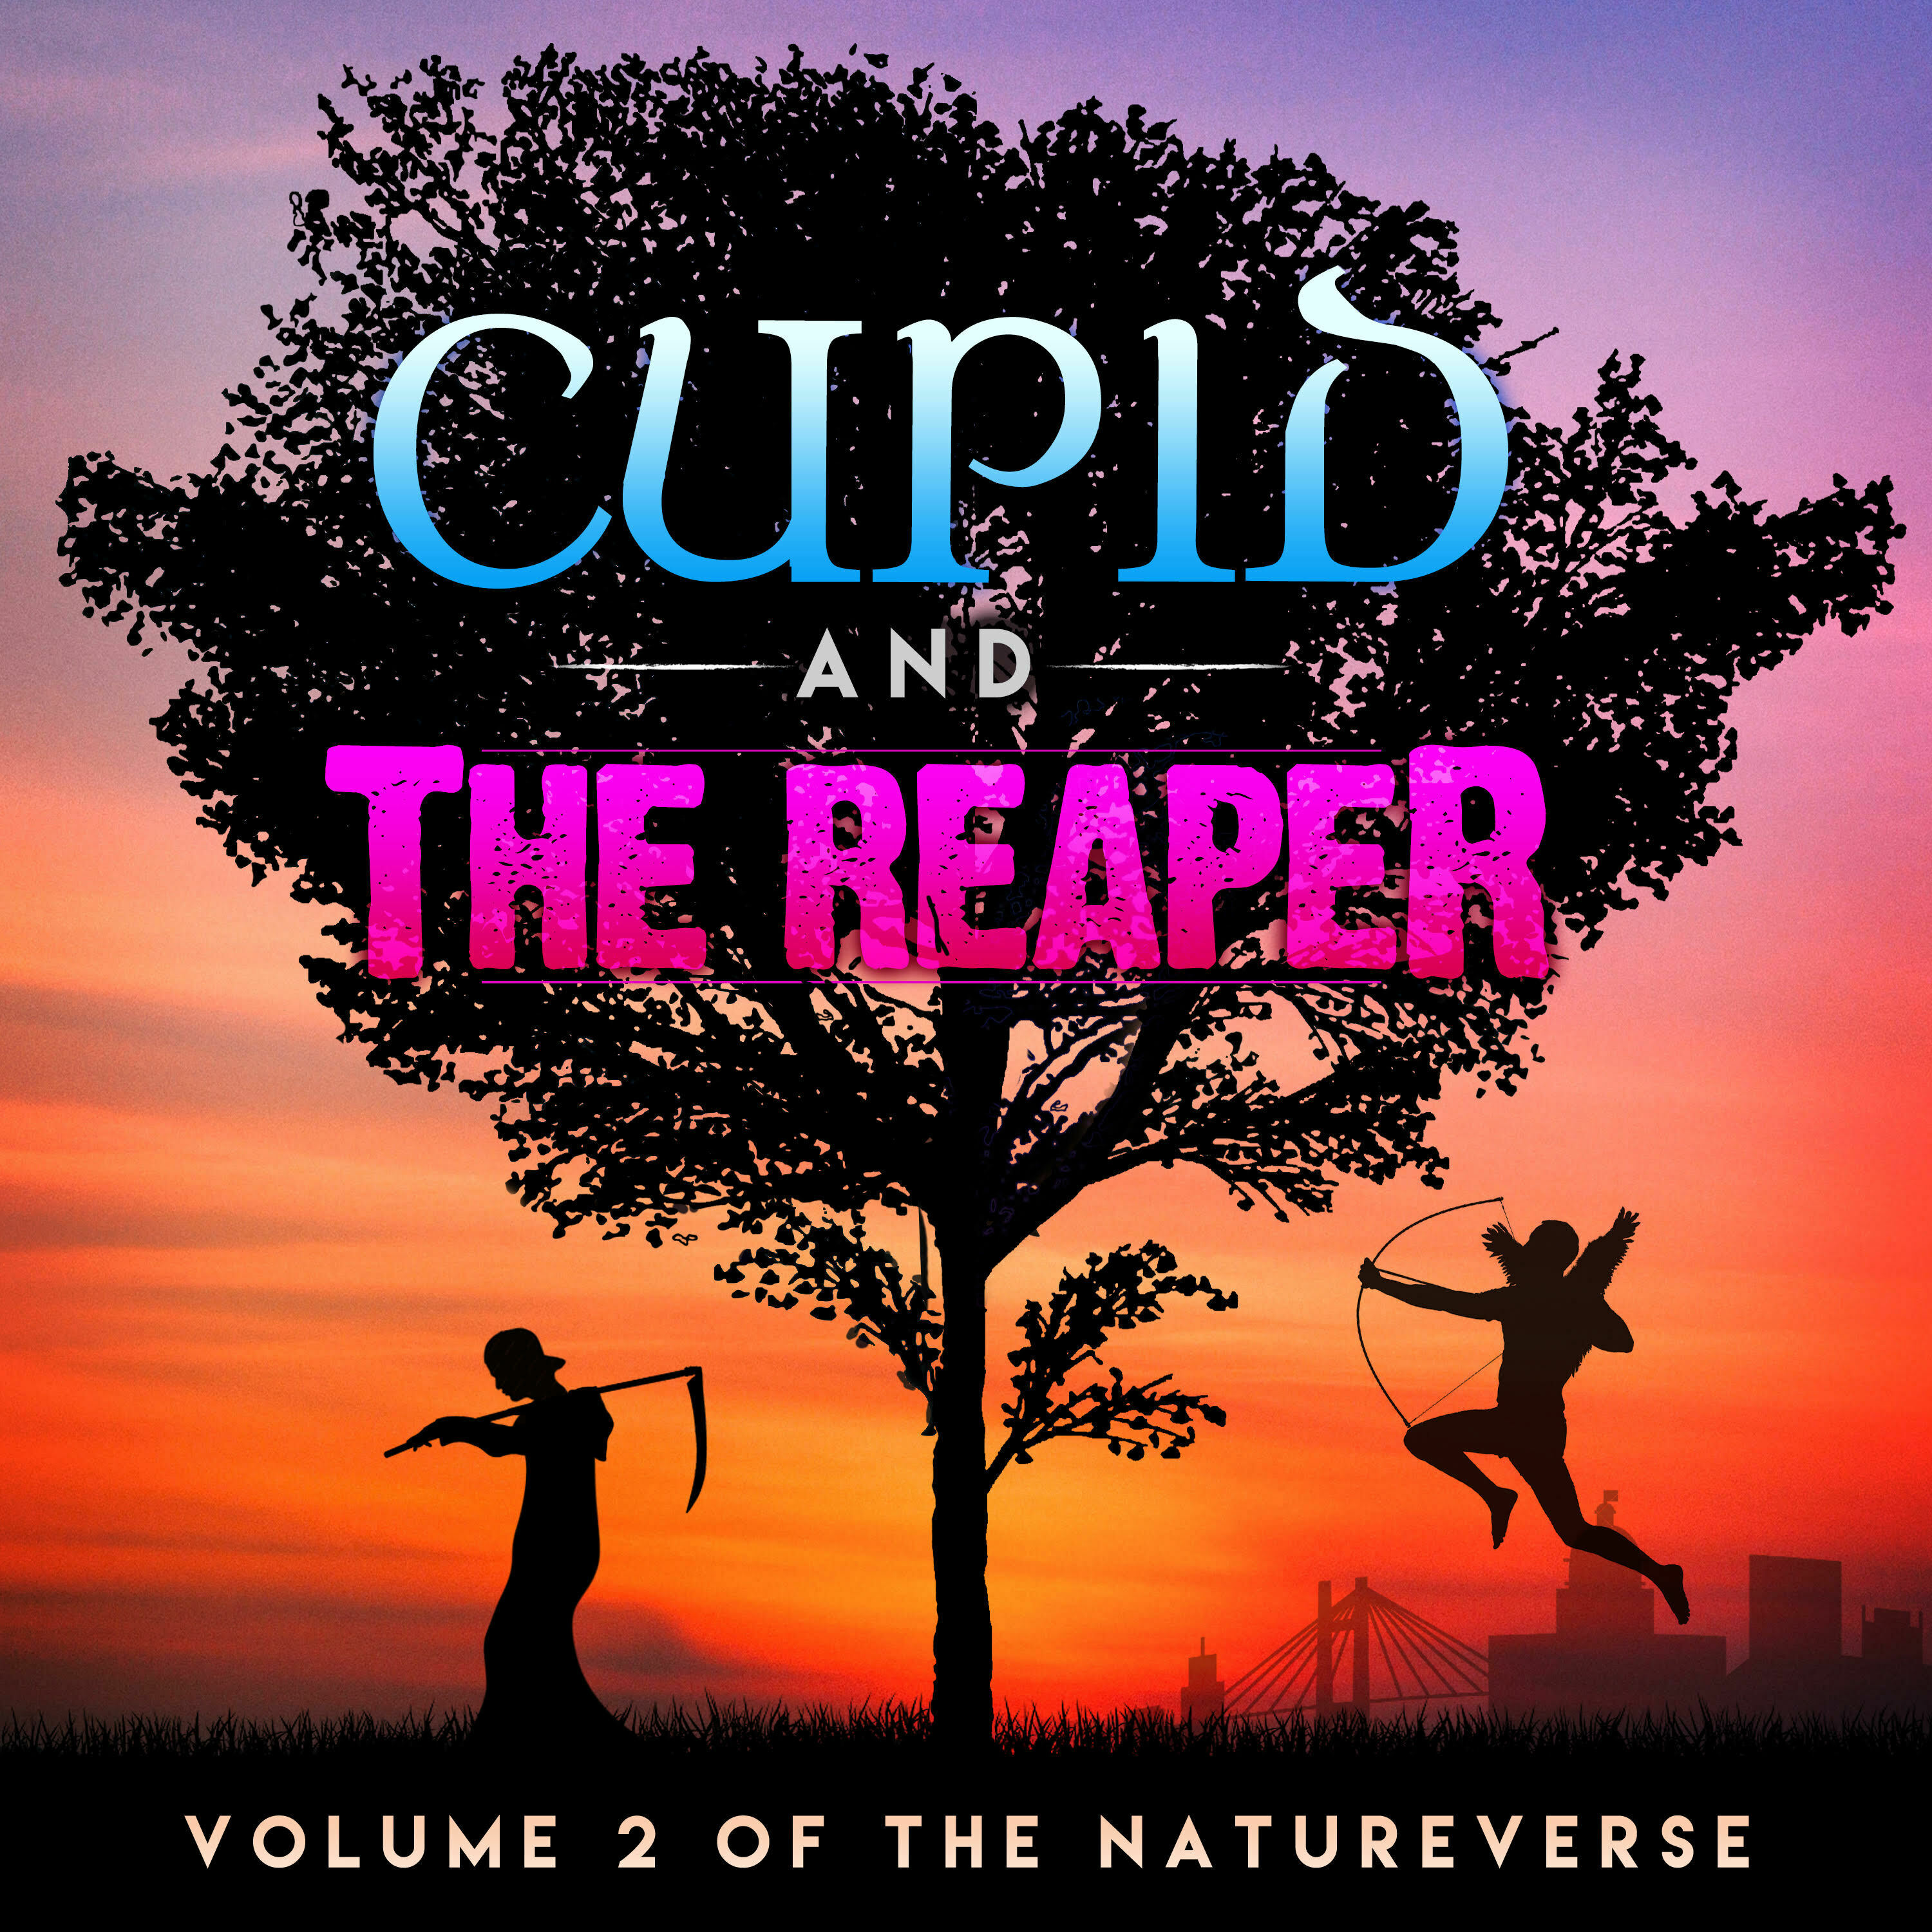 S2 E1: Cupid and the Reaper: Love and Death